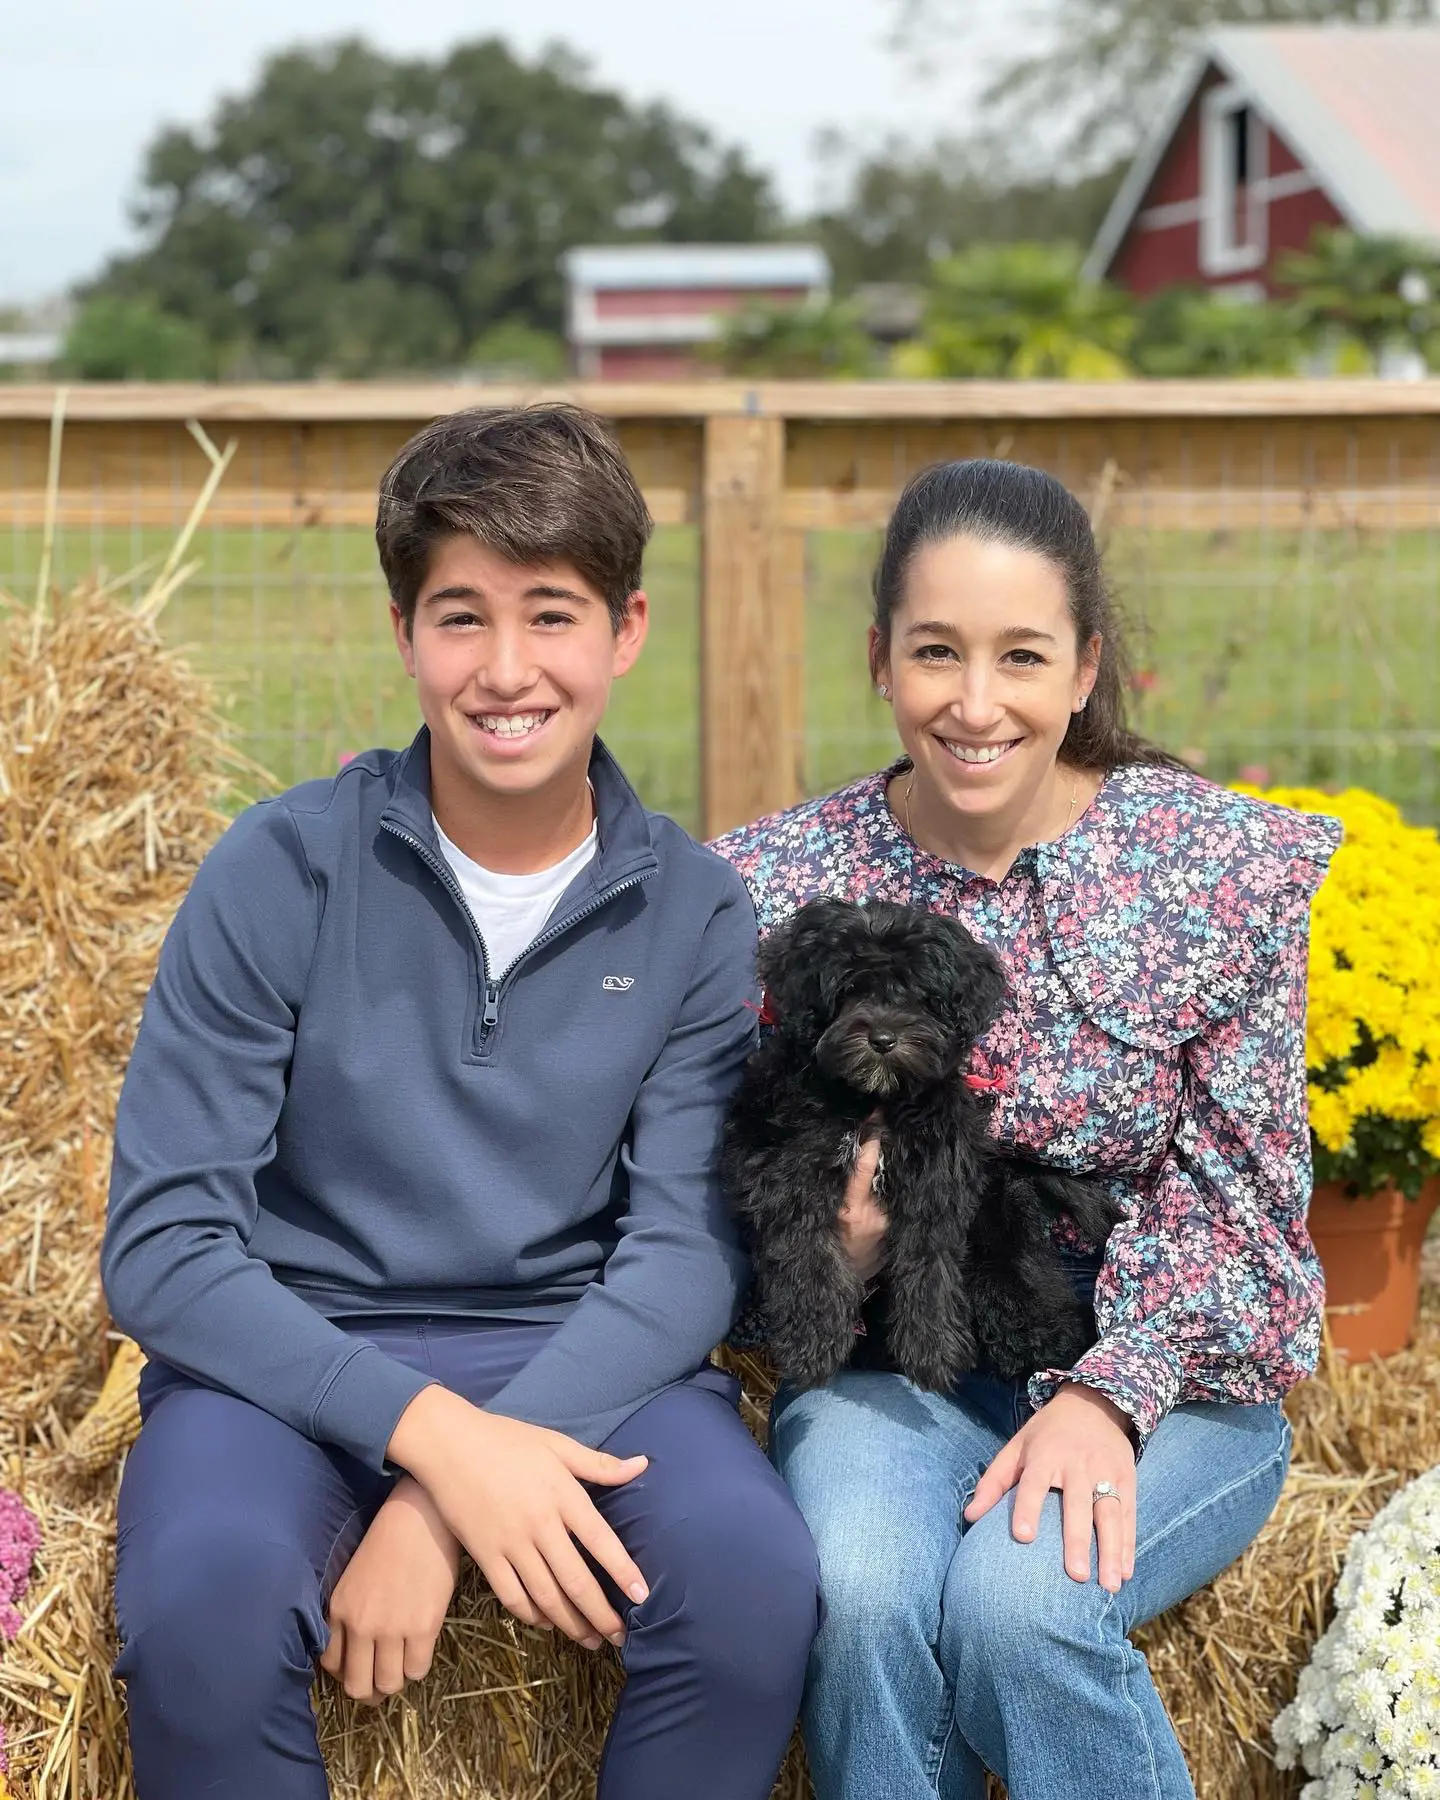 A Family holding their new black golden doodle puppy on Smeraglia farm